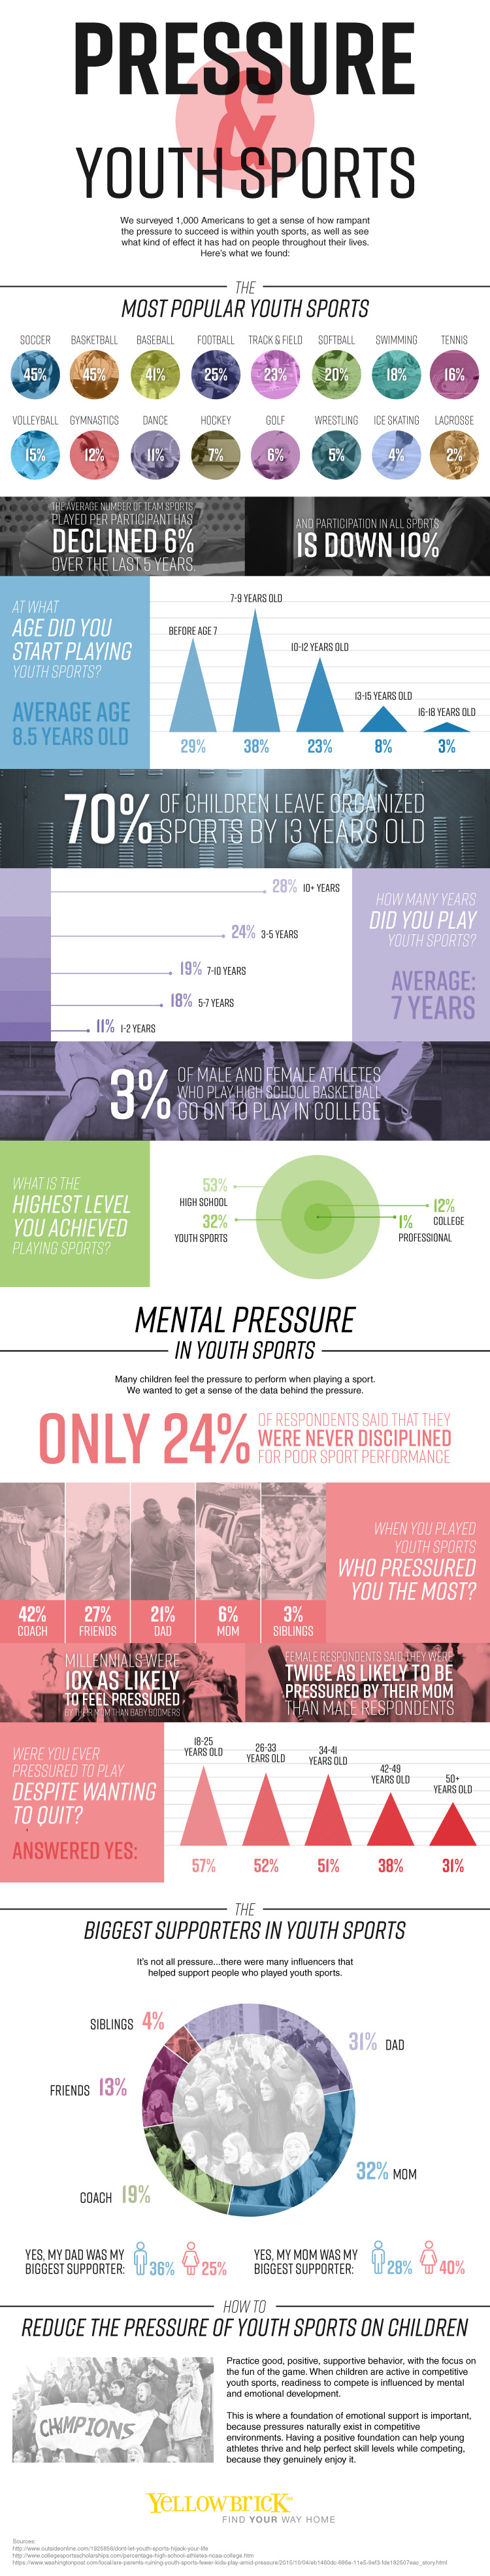 Pressure & Youth Sports